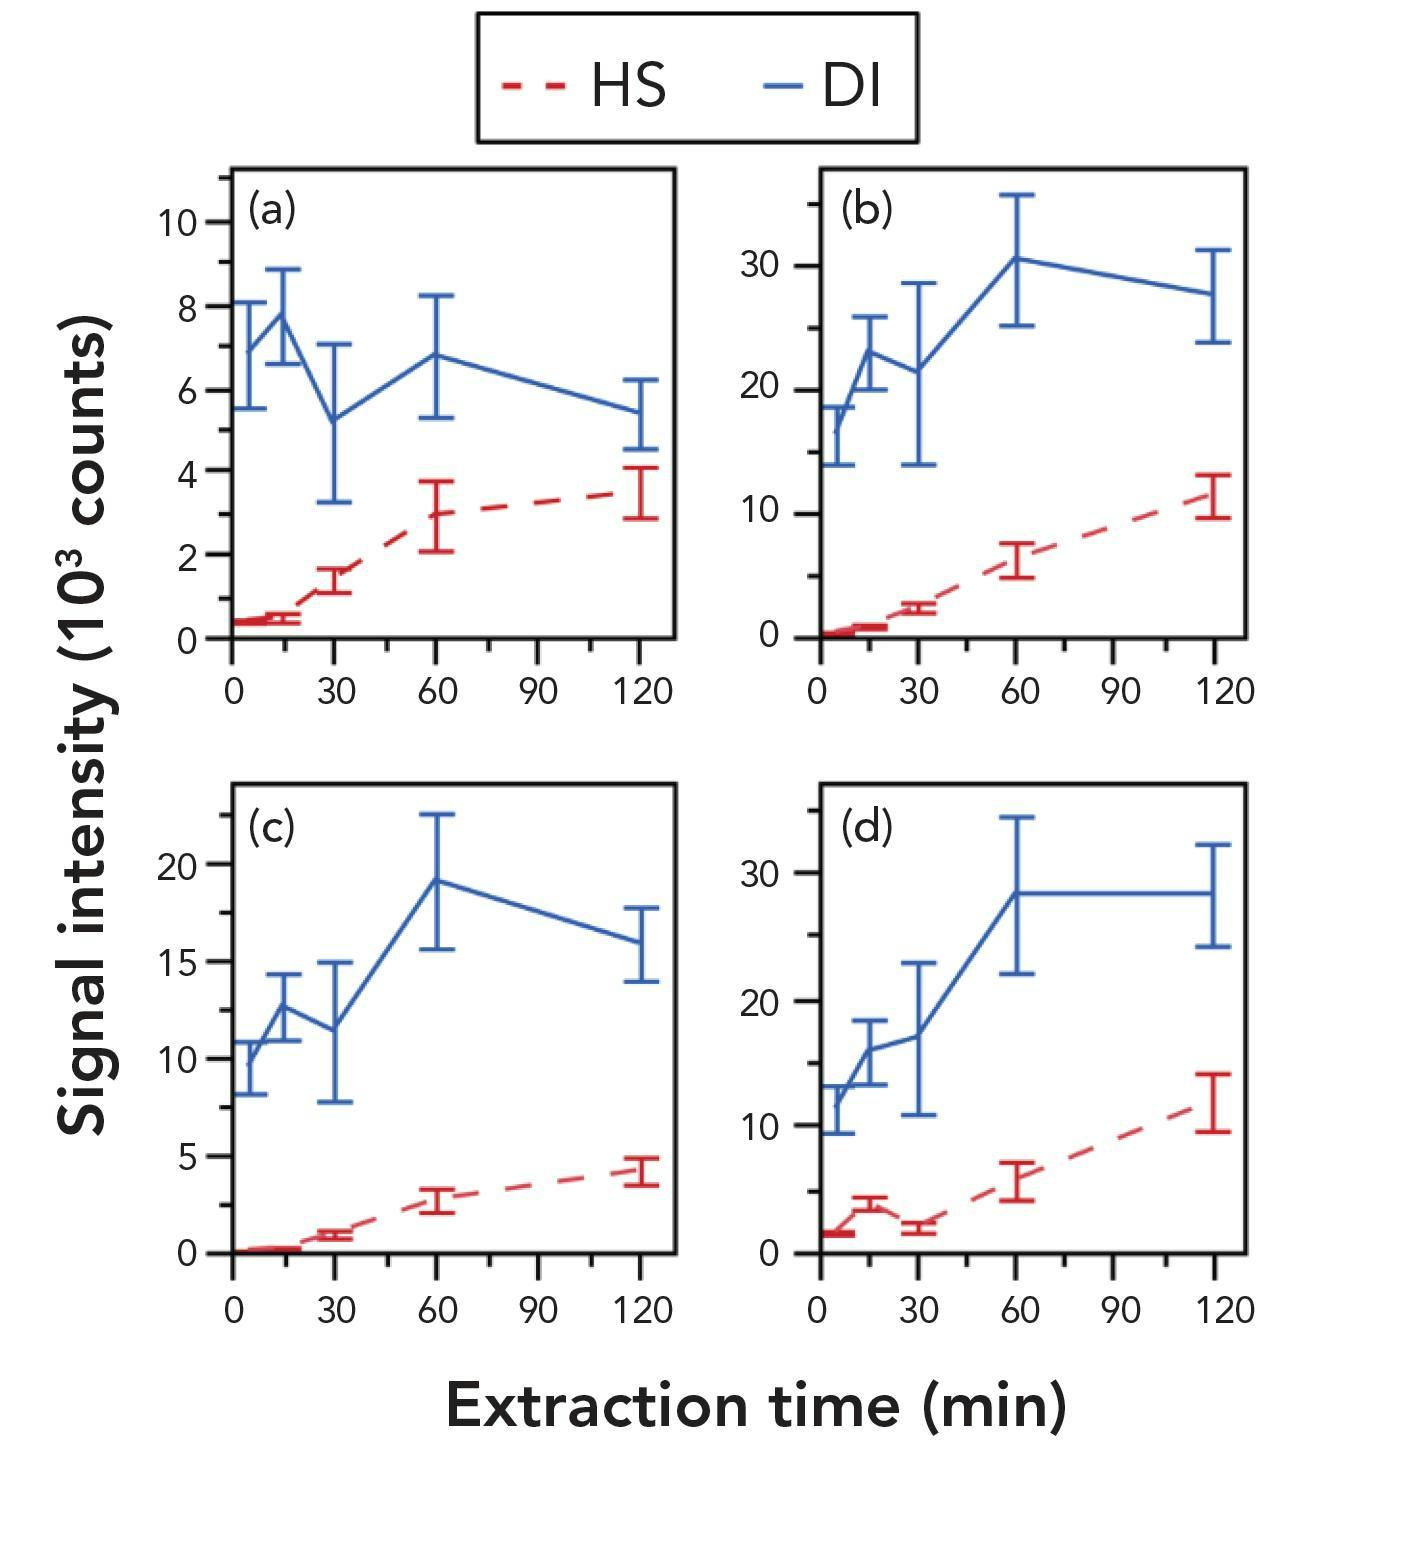 Figure 4: The extraction of phenols—(a) G, (b) 4-MG, (c) 4-EP, and (d) 4-EG—is far more efficient with DI (blue) relative to HS (red), allowing extraction times to be cut to maximize analytical throughput.